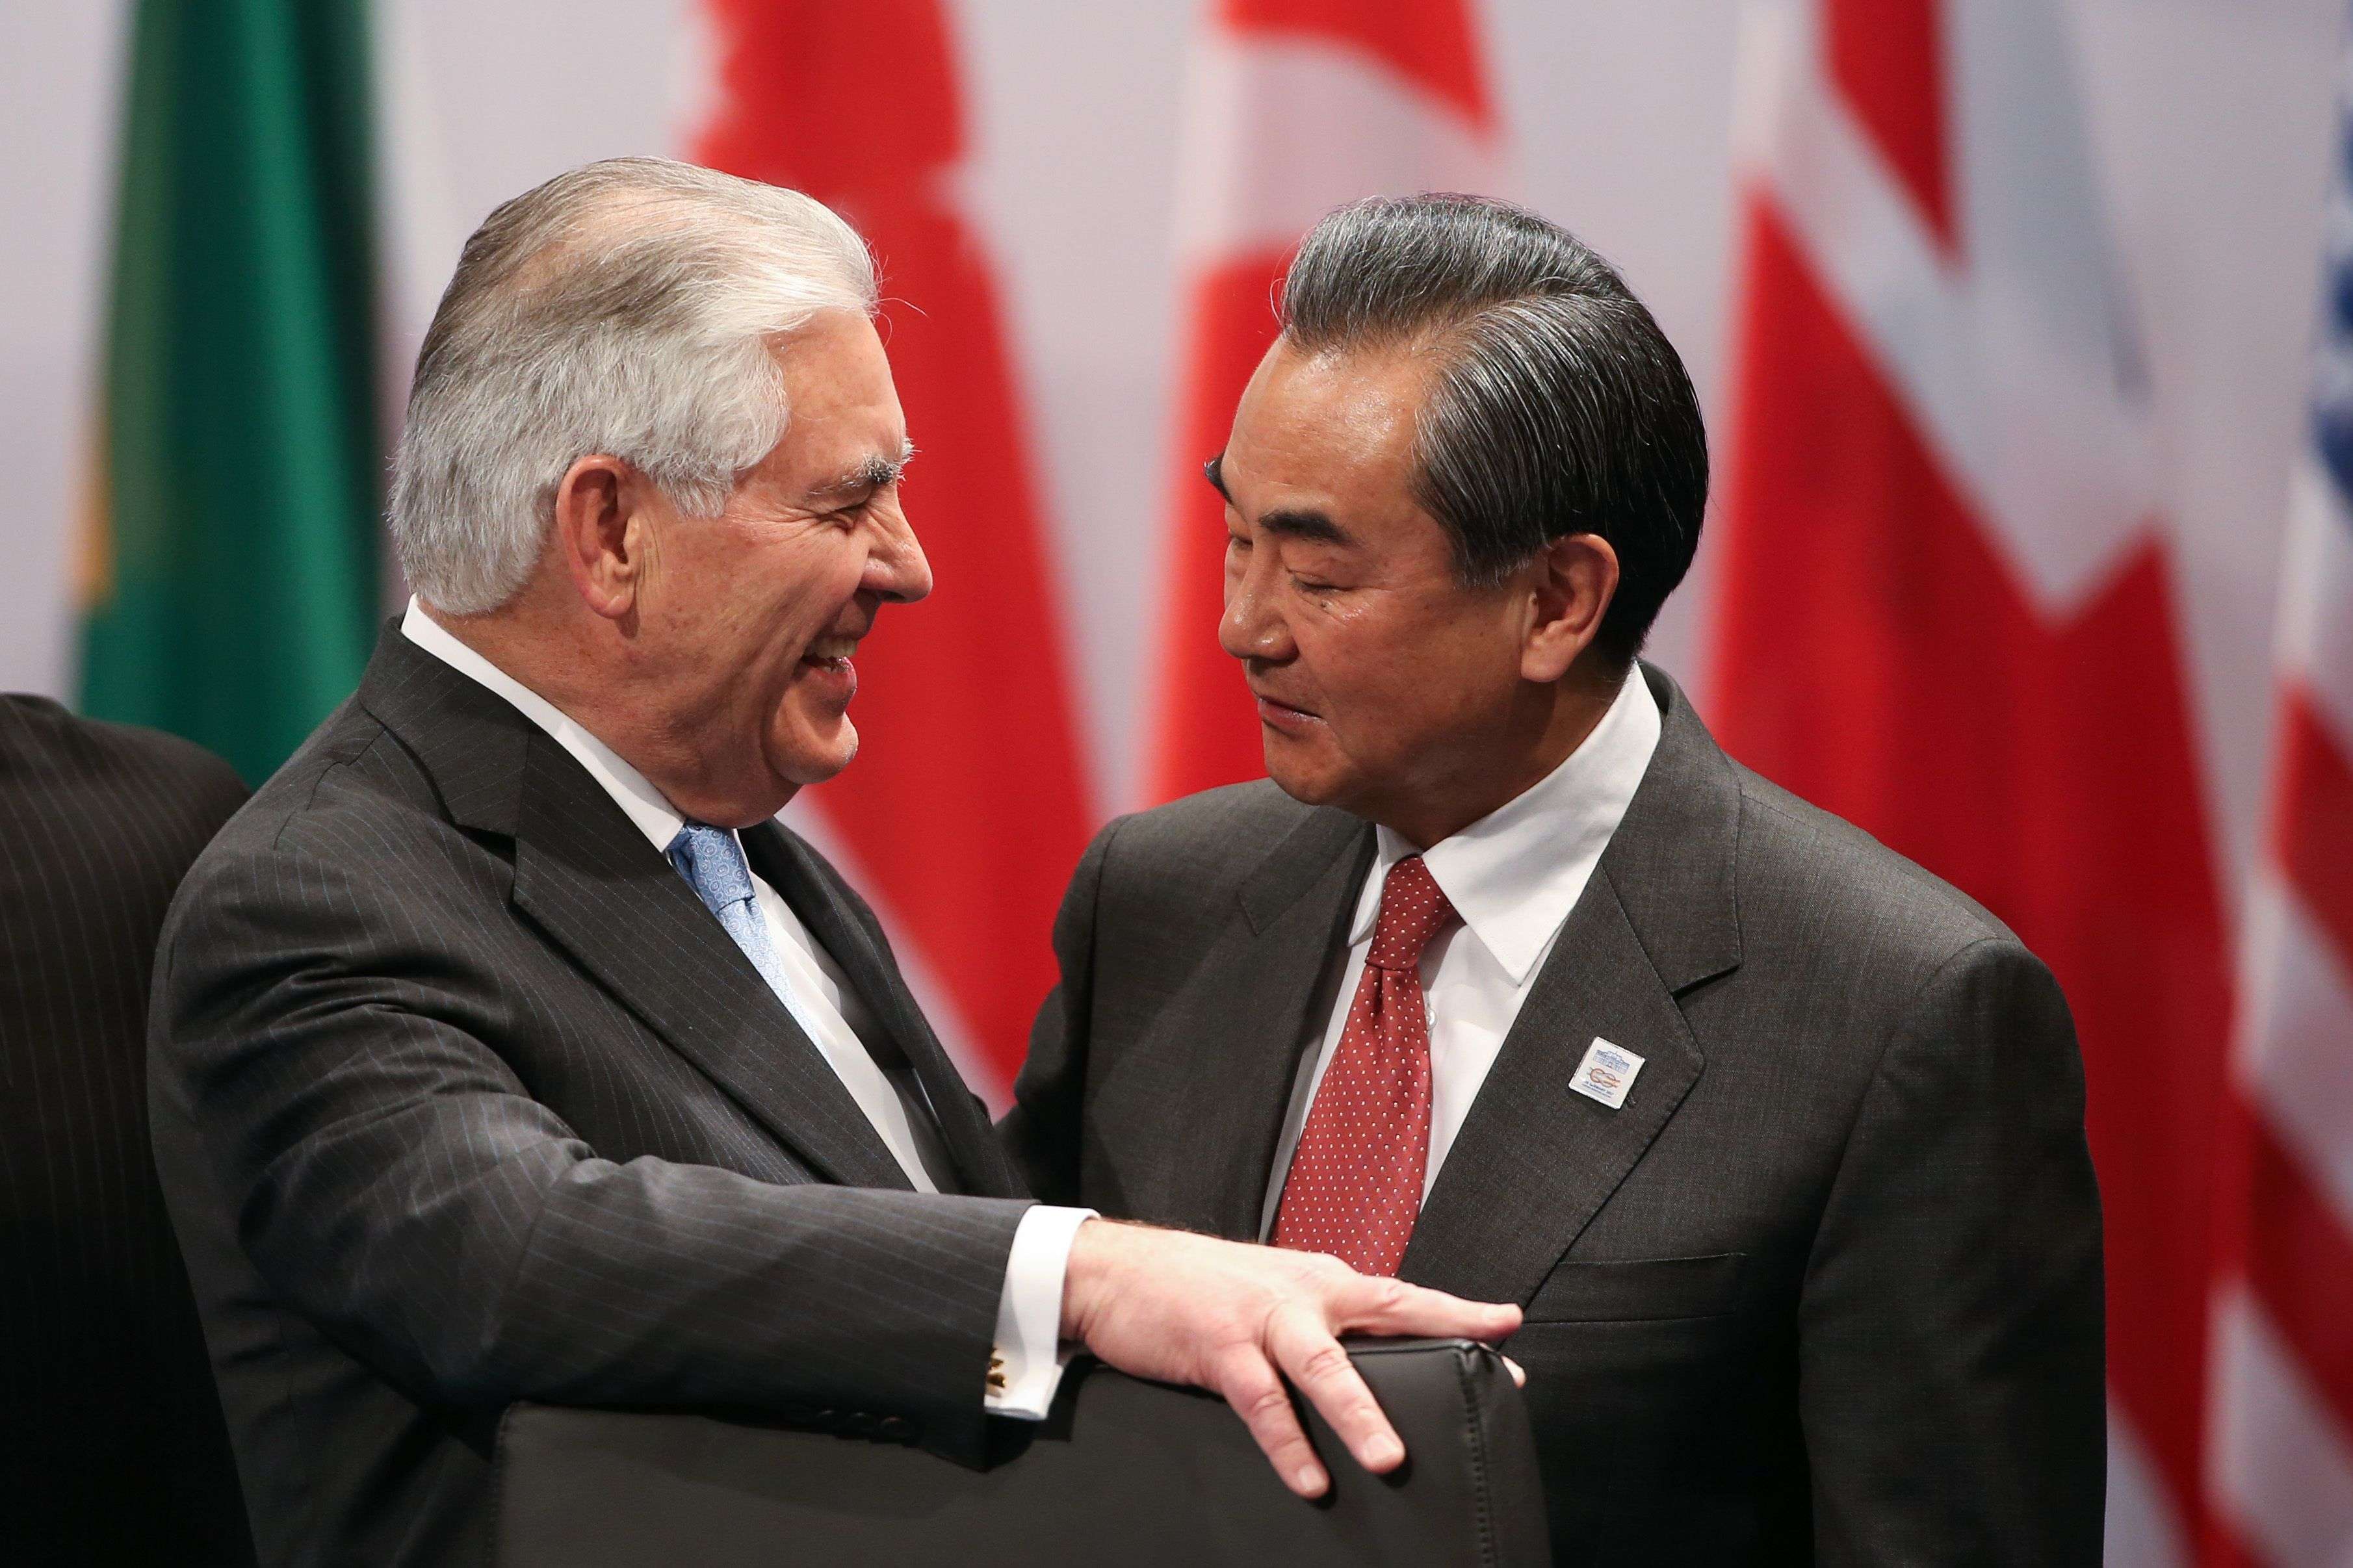 US Secretary of State Rex Tillerson with Foreign Minister Wang Yi at the G20 foreign ministers meeting in Bonn. Photo: AFP